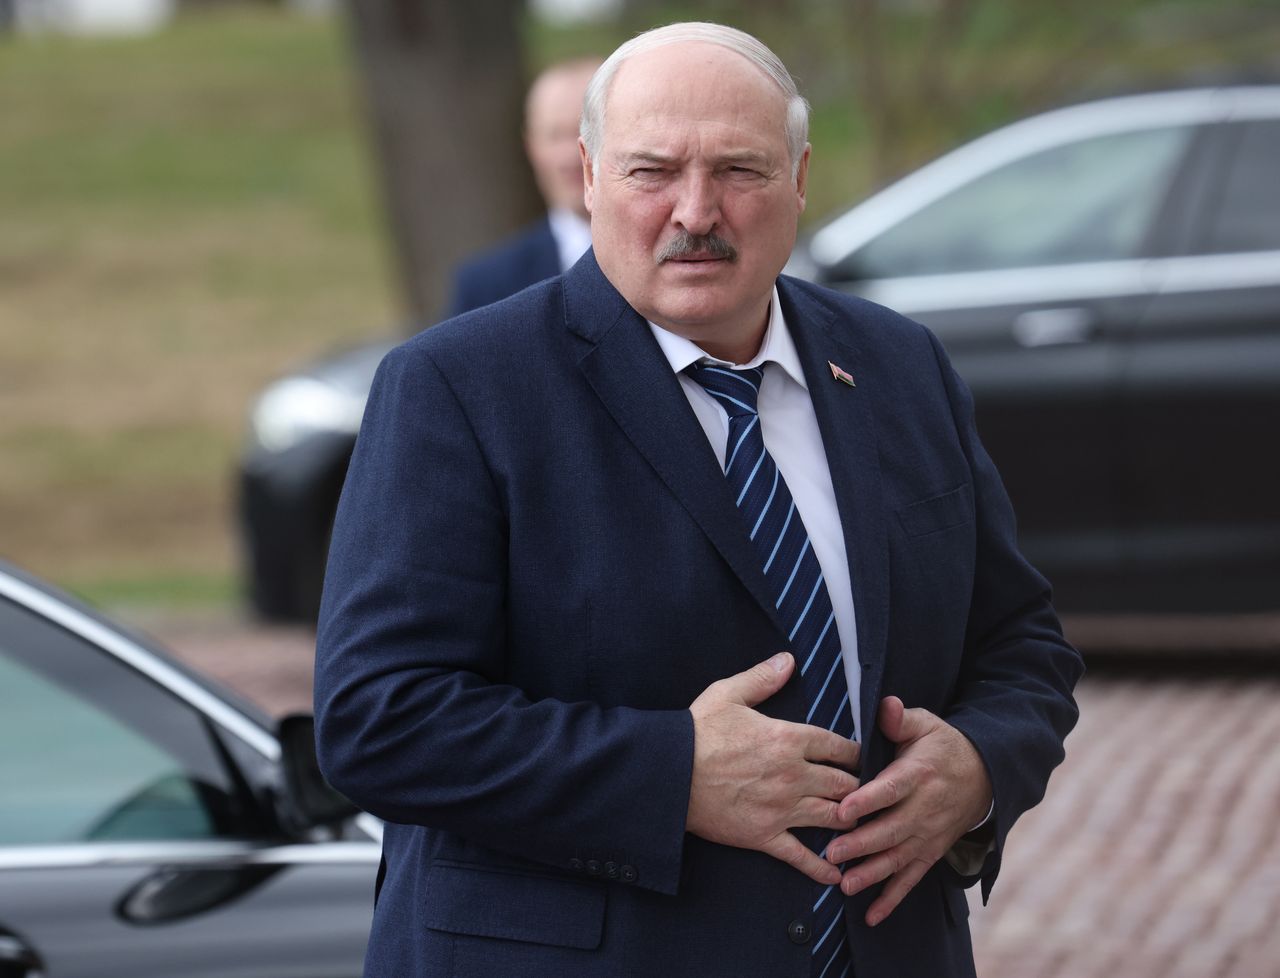 Aleksandr Lukashenko admitted what he dreams about at night